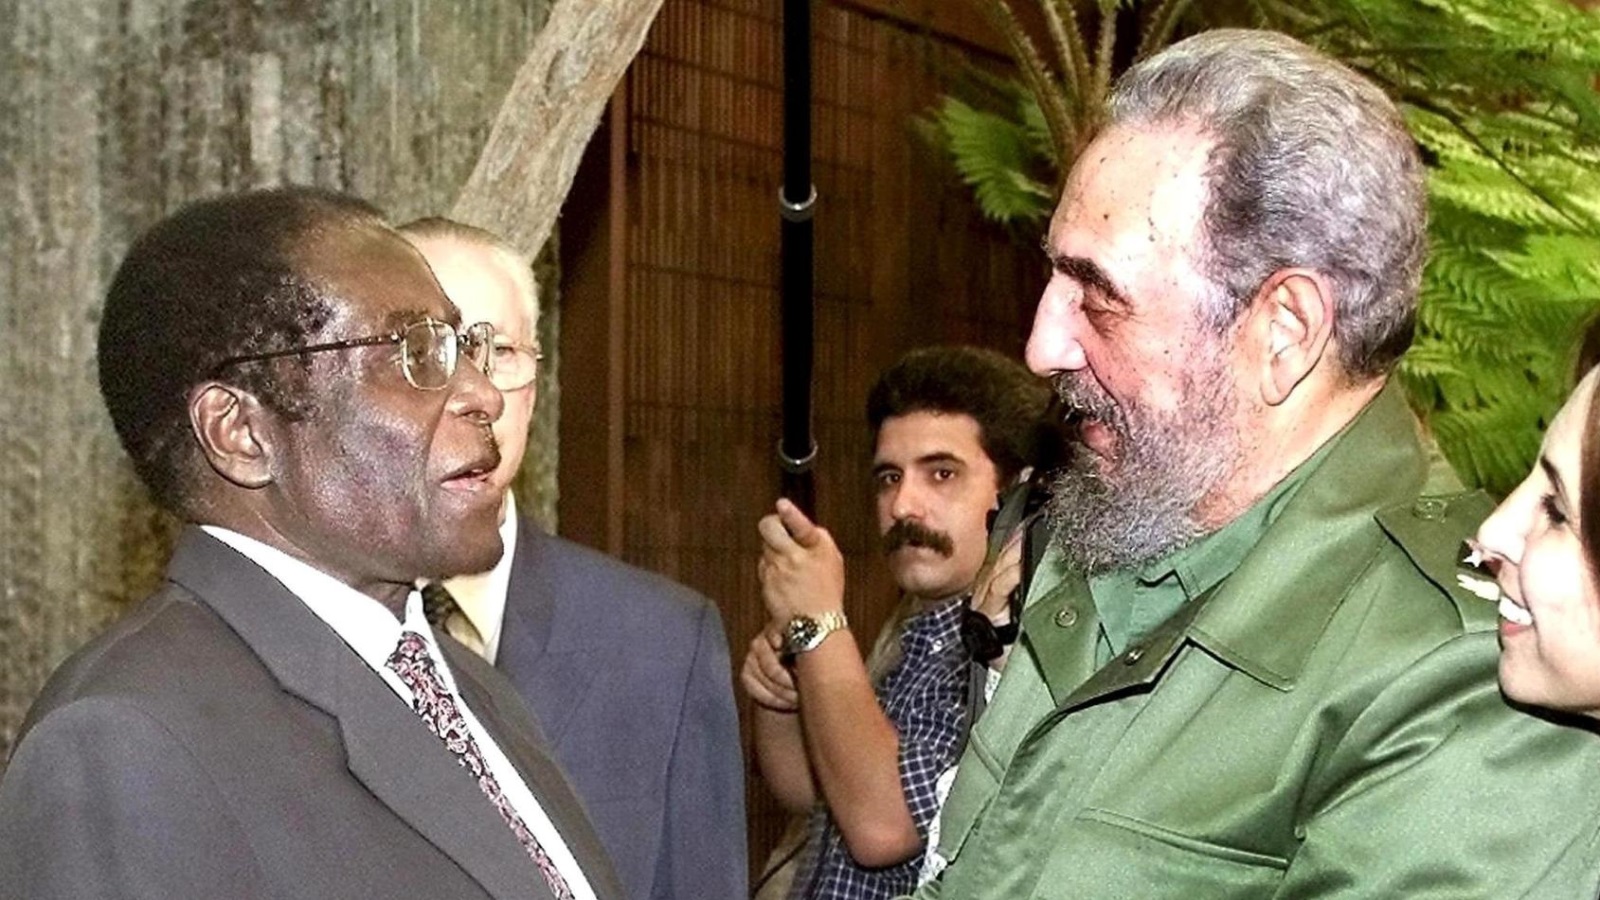 (FILE) A file picture dated 16 July 2002 of Zimbabwe's President Robert Mugabe (L) welcomed by Cuban leader Fidel Castro at the Revolution Palace in Havana, Cuba. According to a Cuban state TV broadcast, Cuban former President Fidel Castro has died at the age of 90 on 25 November 2016.